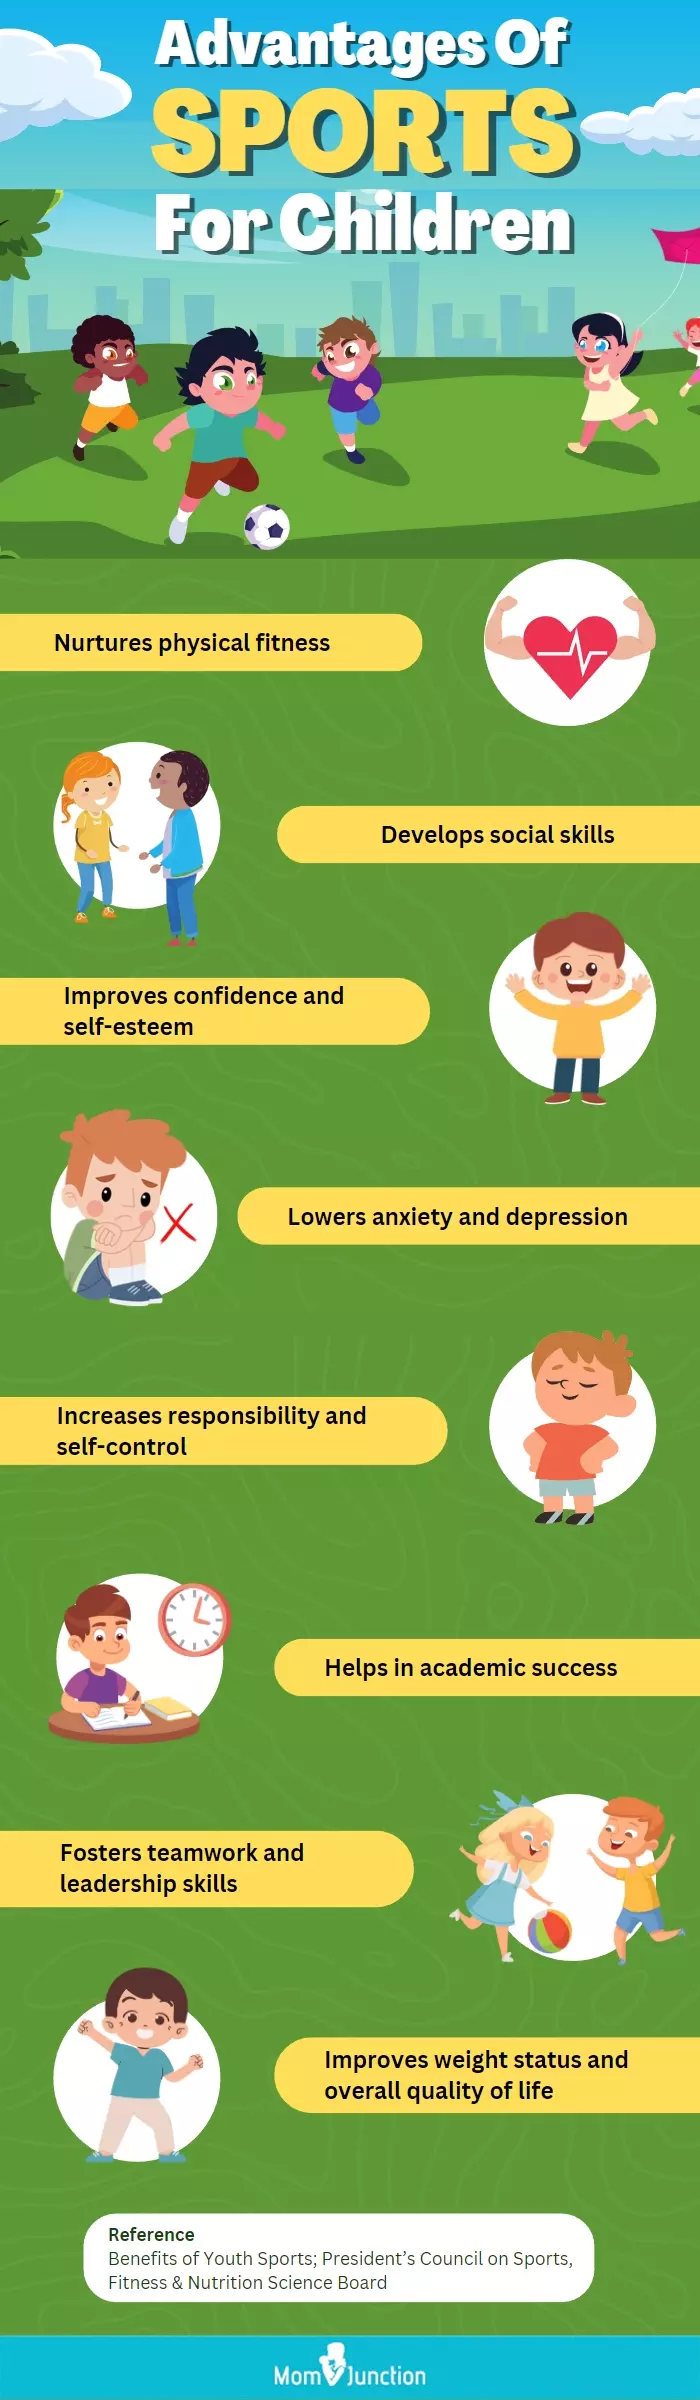 advantages of sports for children (infographic)